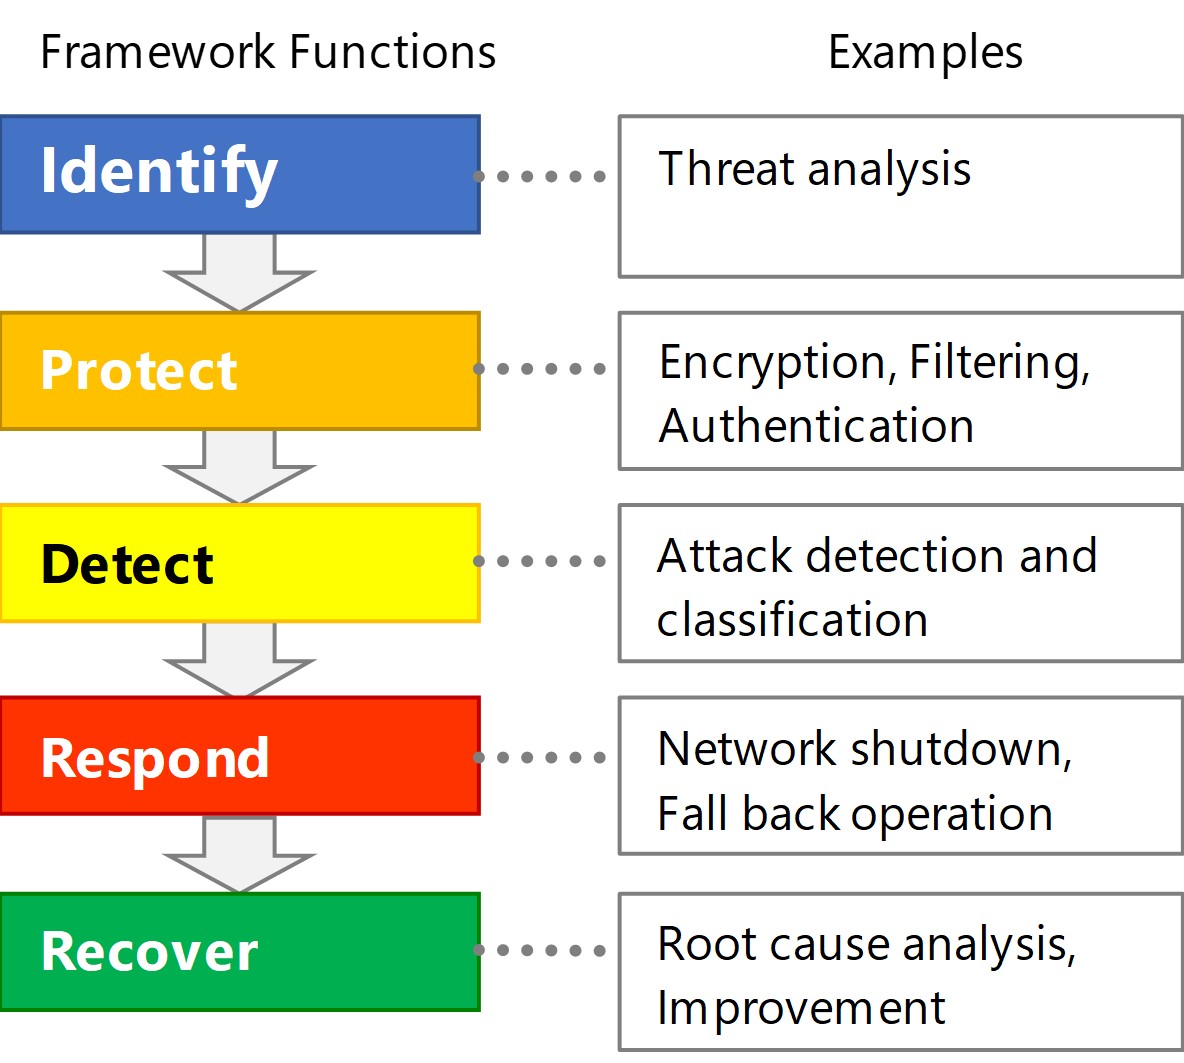 Fig. 1 Outline of the NIST Cybersecurity Framework